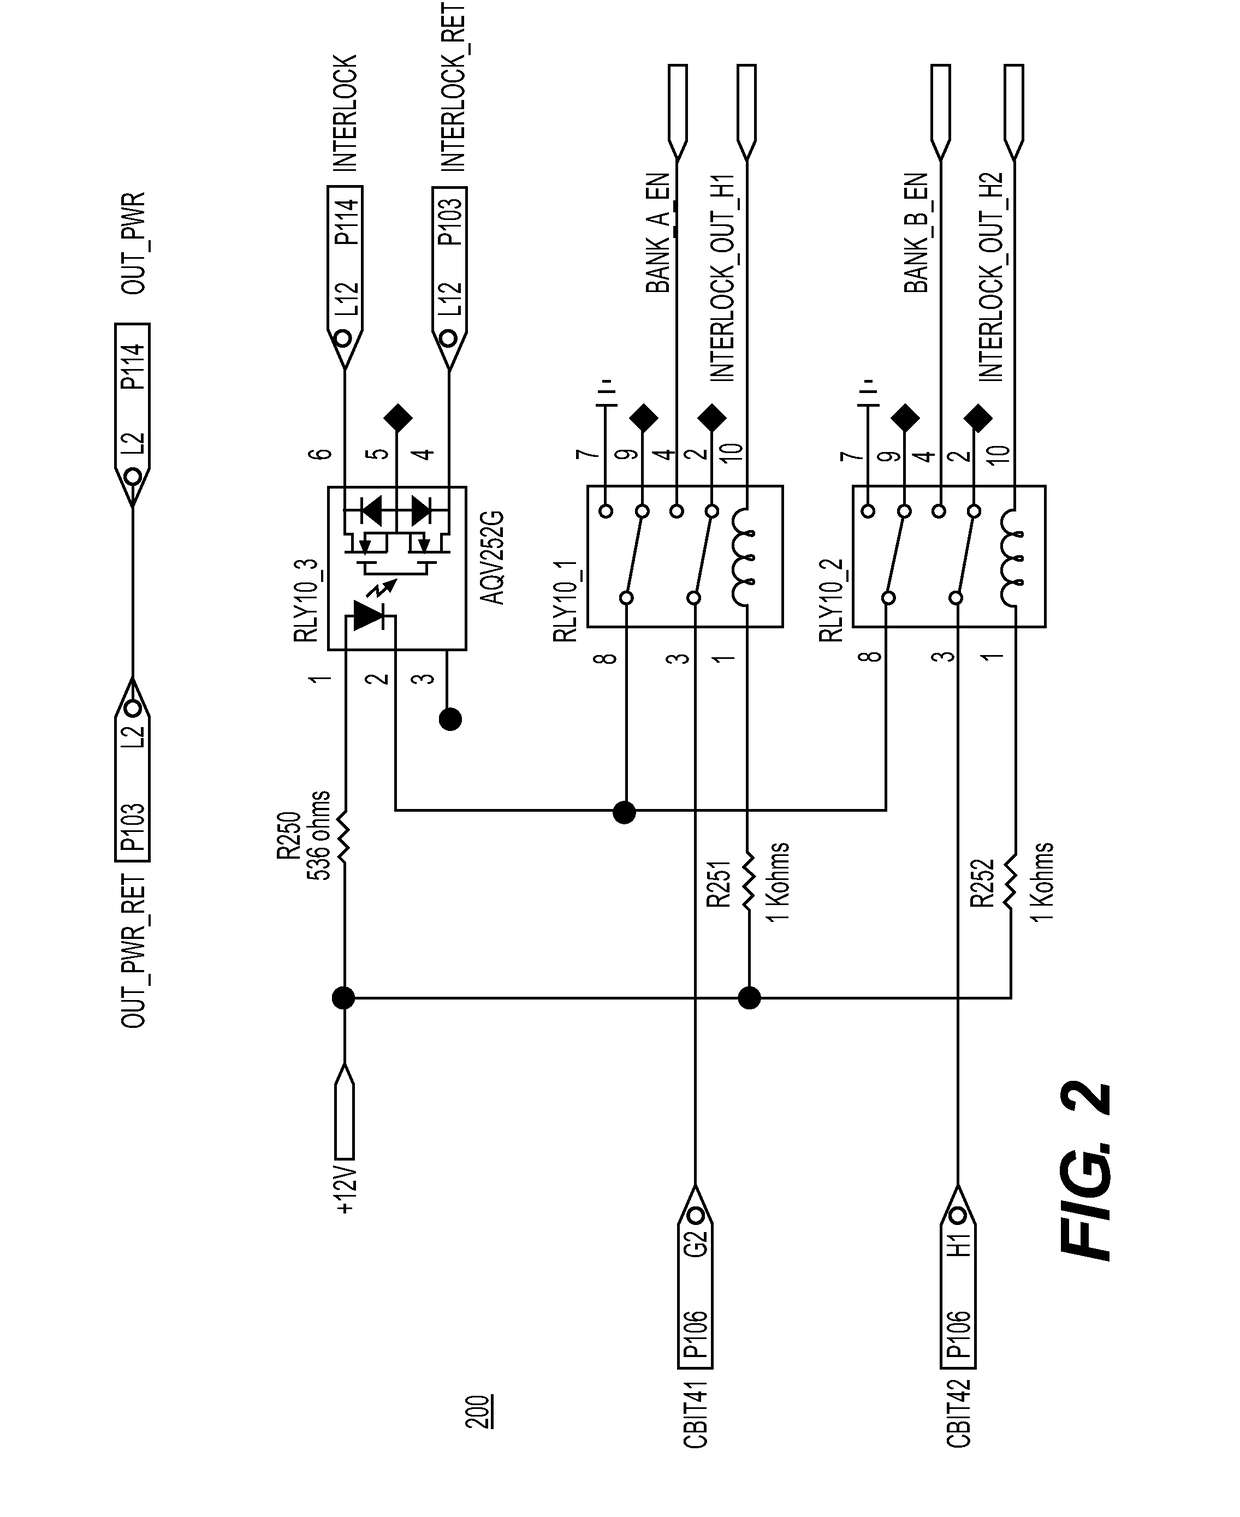 Modular multiplexing interface assembly for reducing semiconductor testing index time